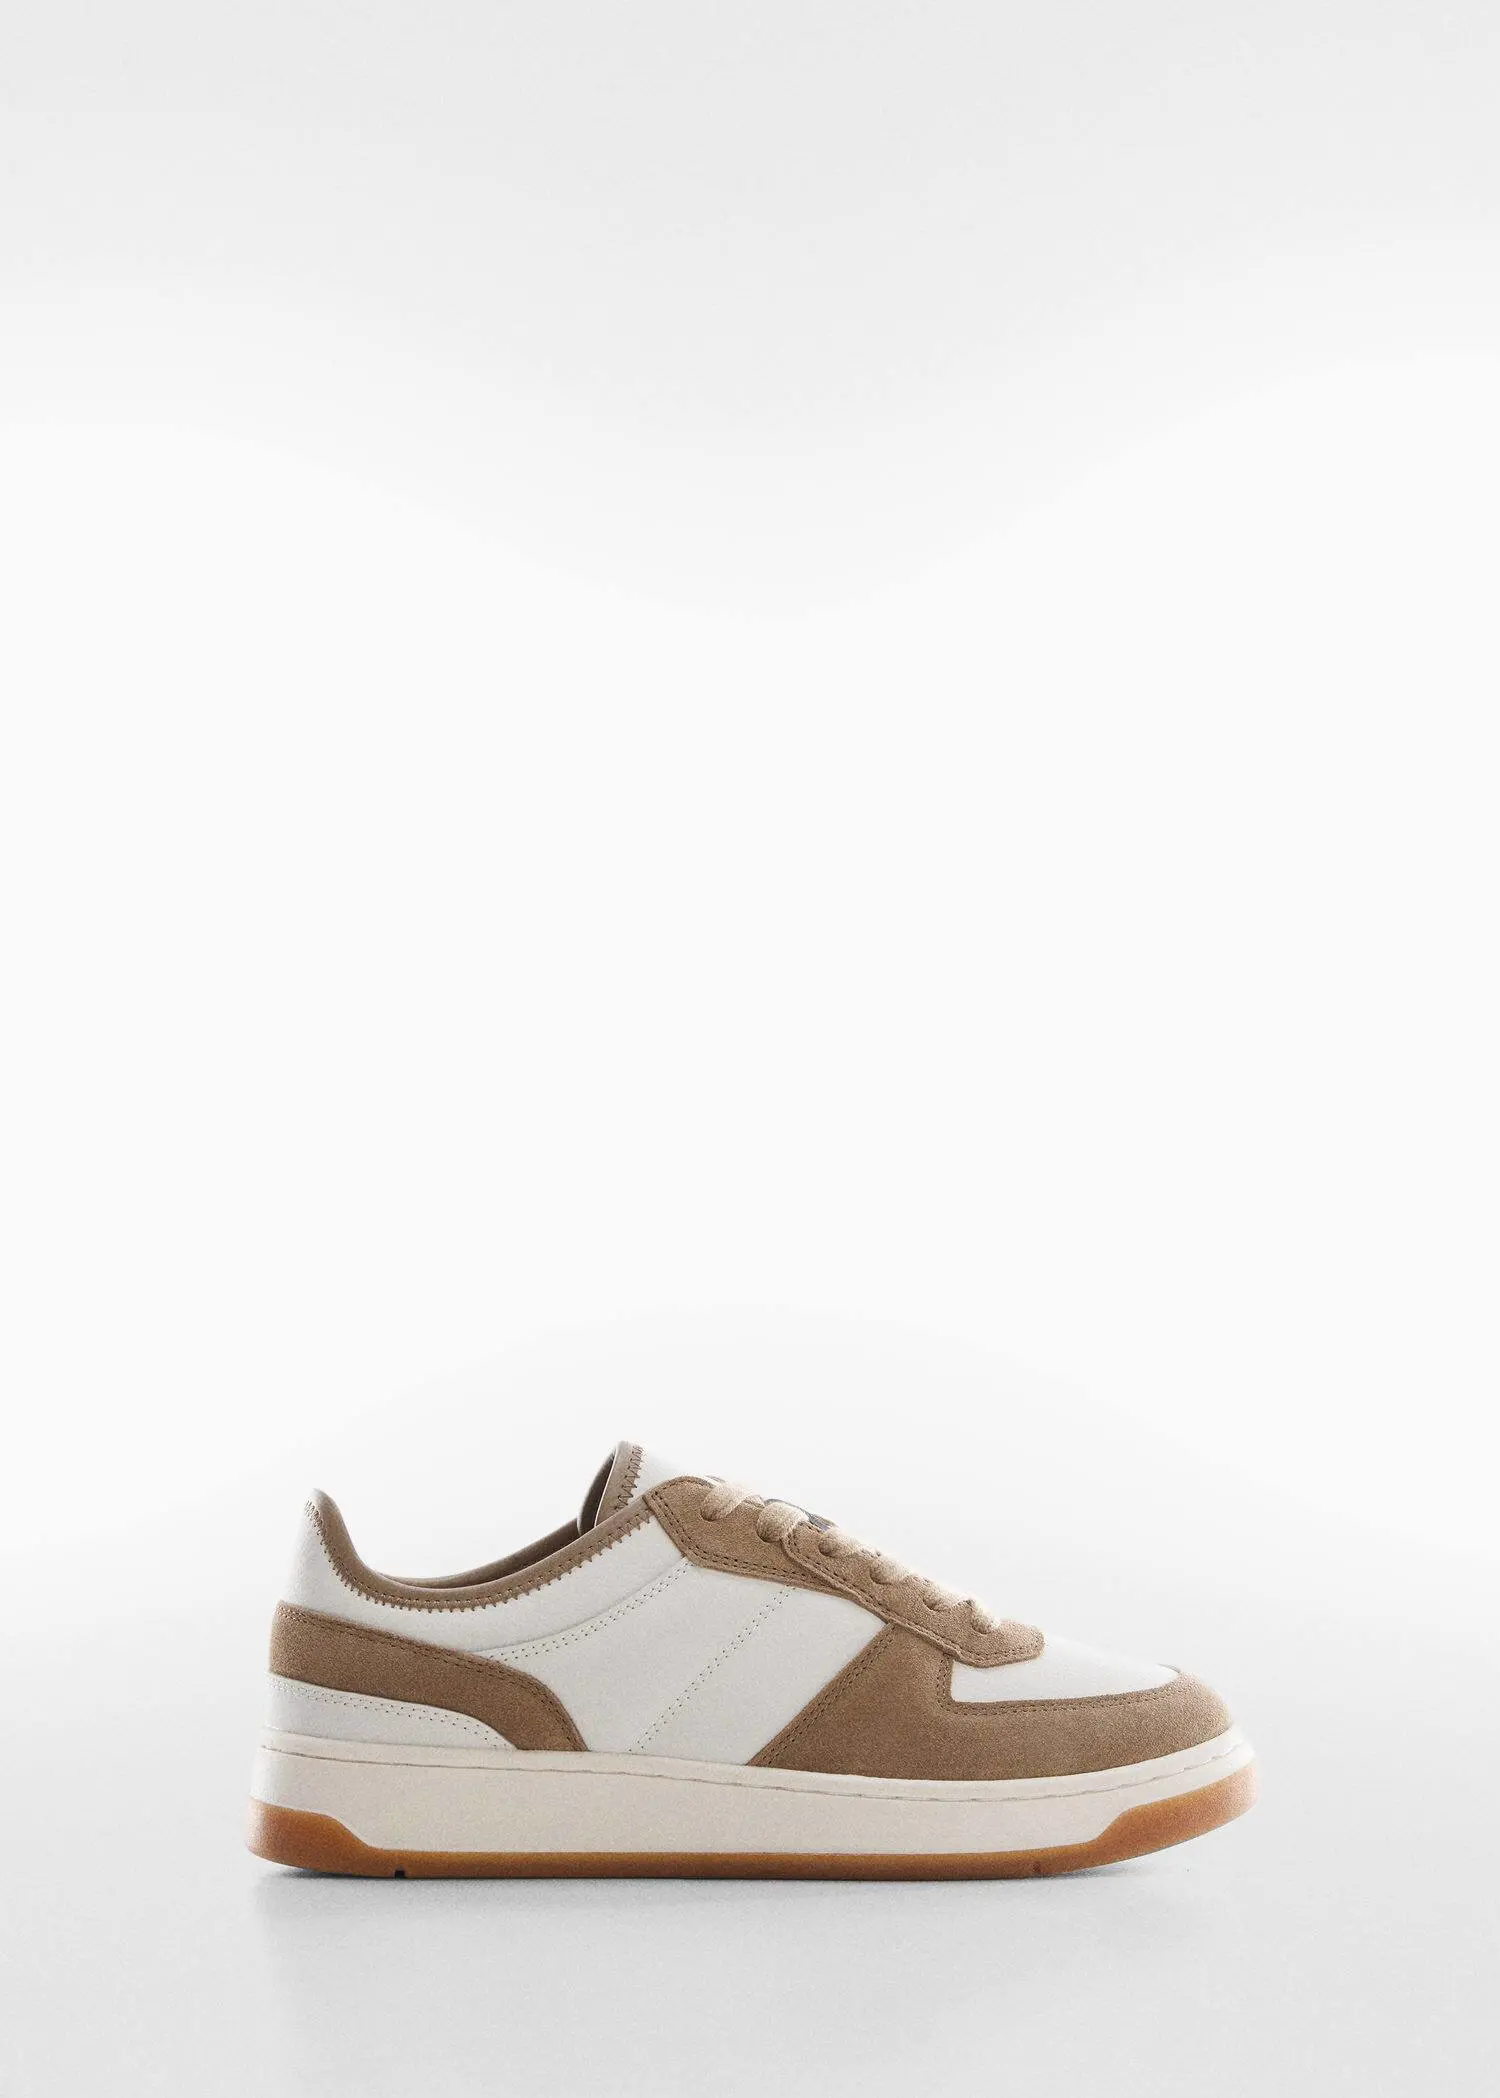 Mango Combined leather trainers. 1